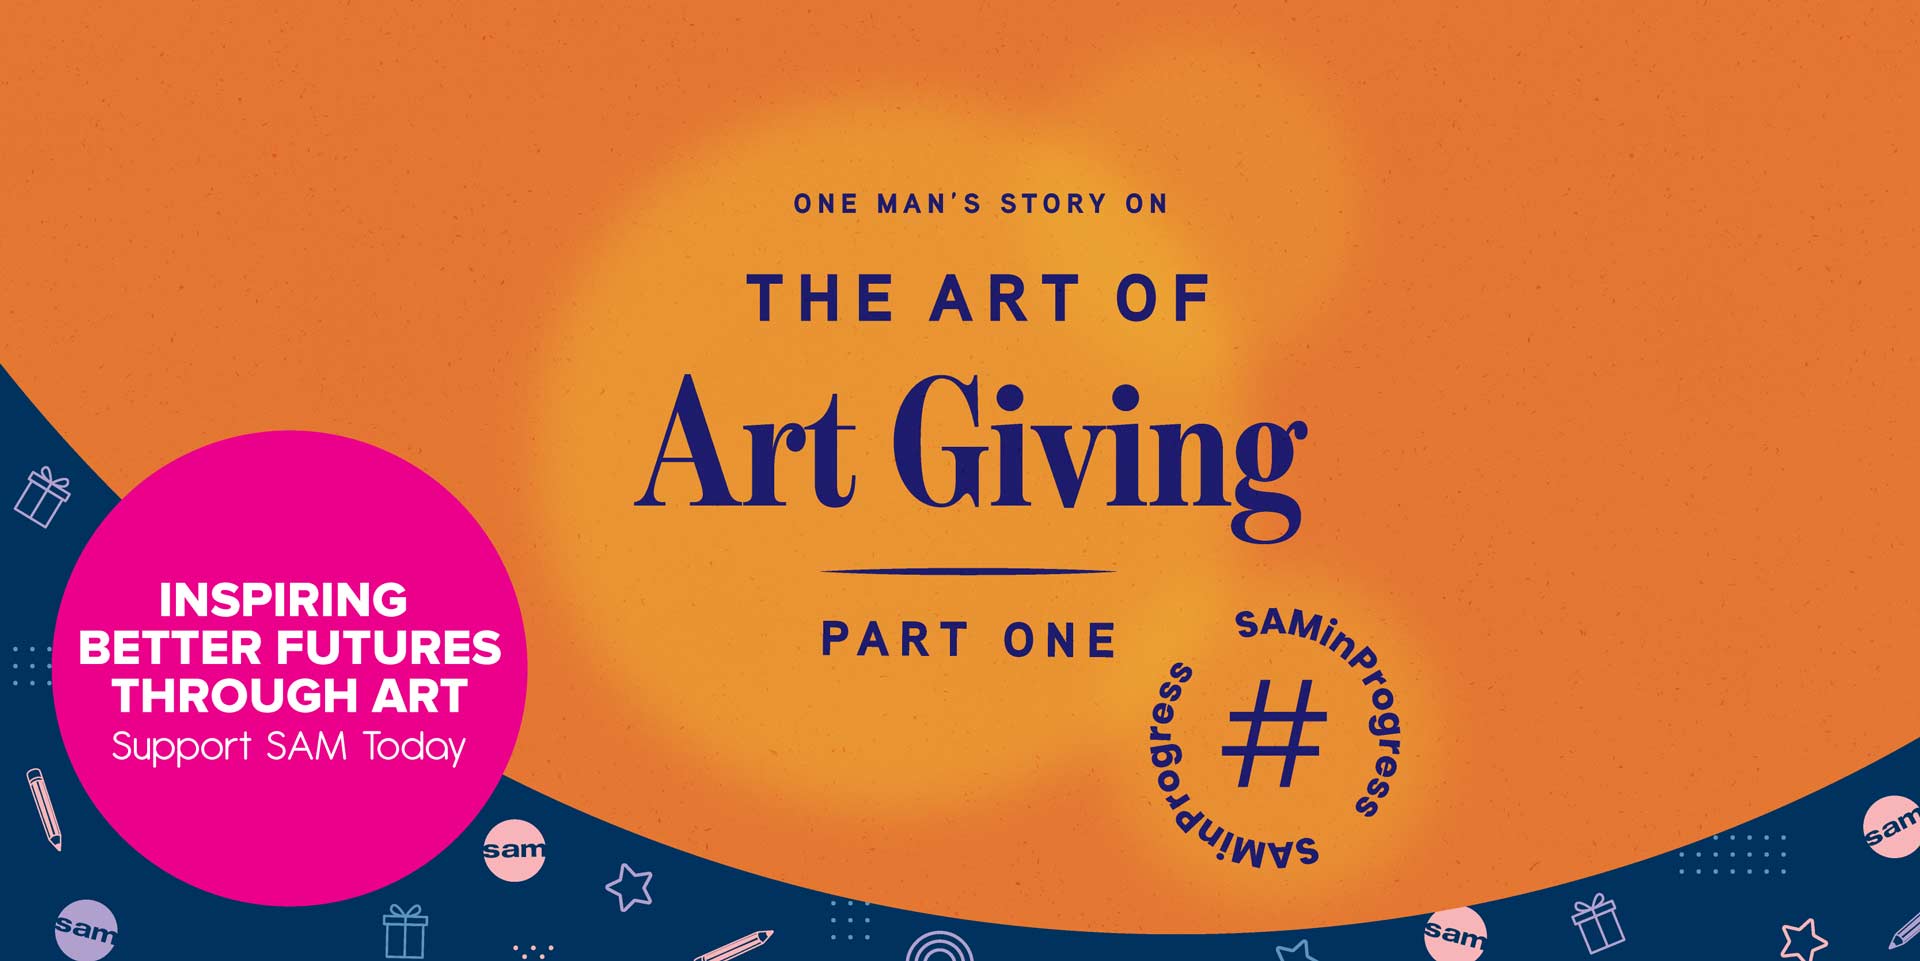 One Man’s Story on the Art of Art Giving